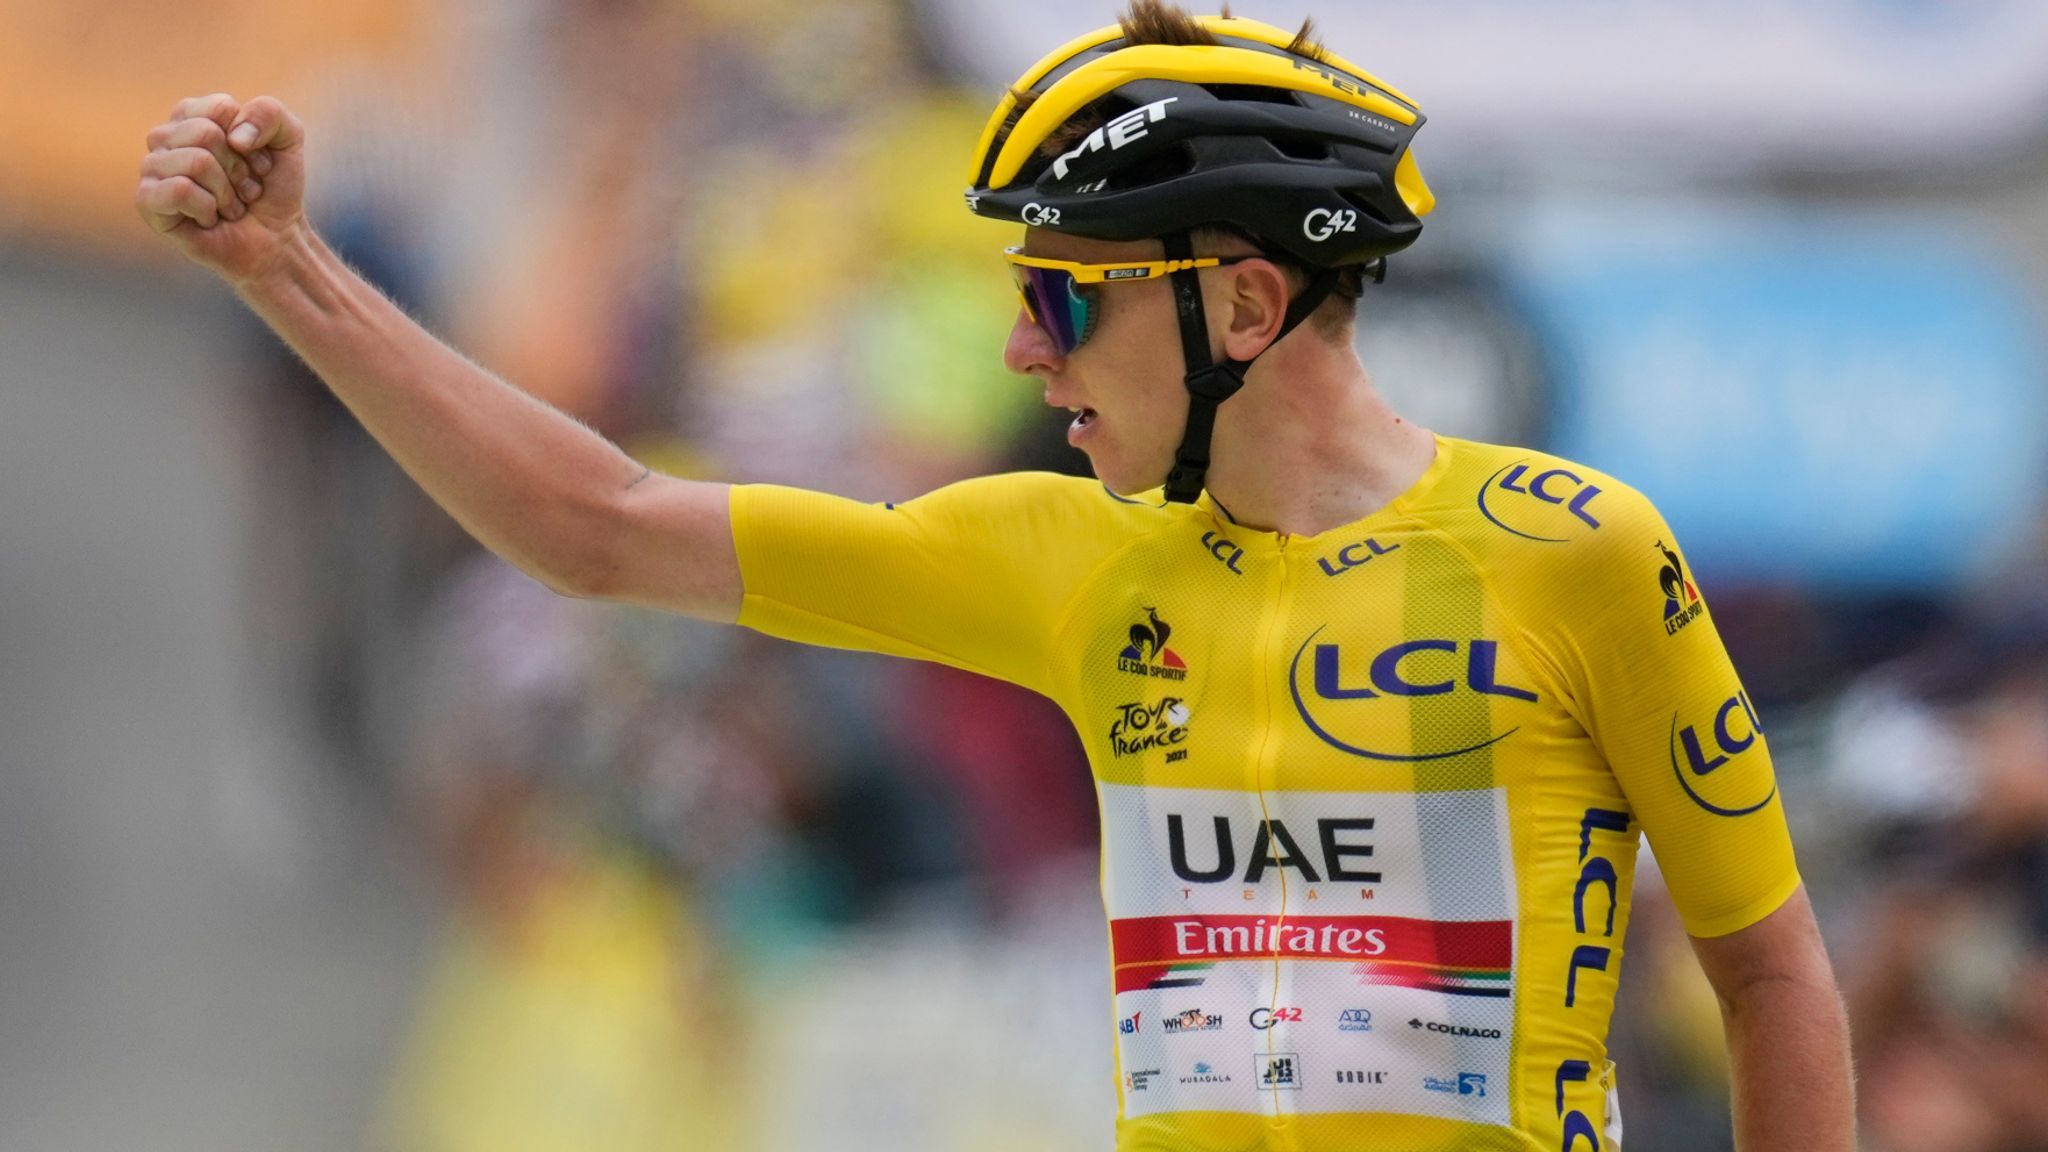 Tour de France: Tadej Pogacar moves closer to title with Stage 18 victory